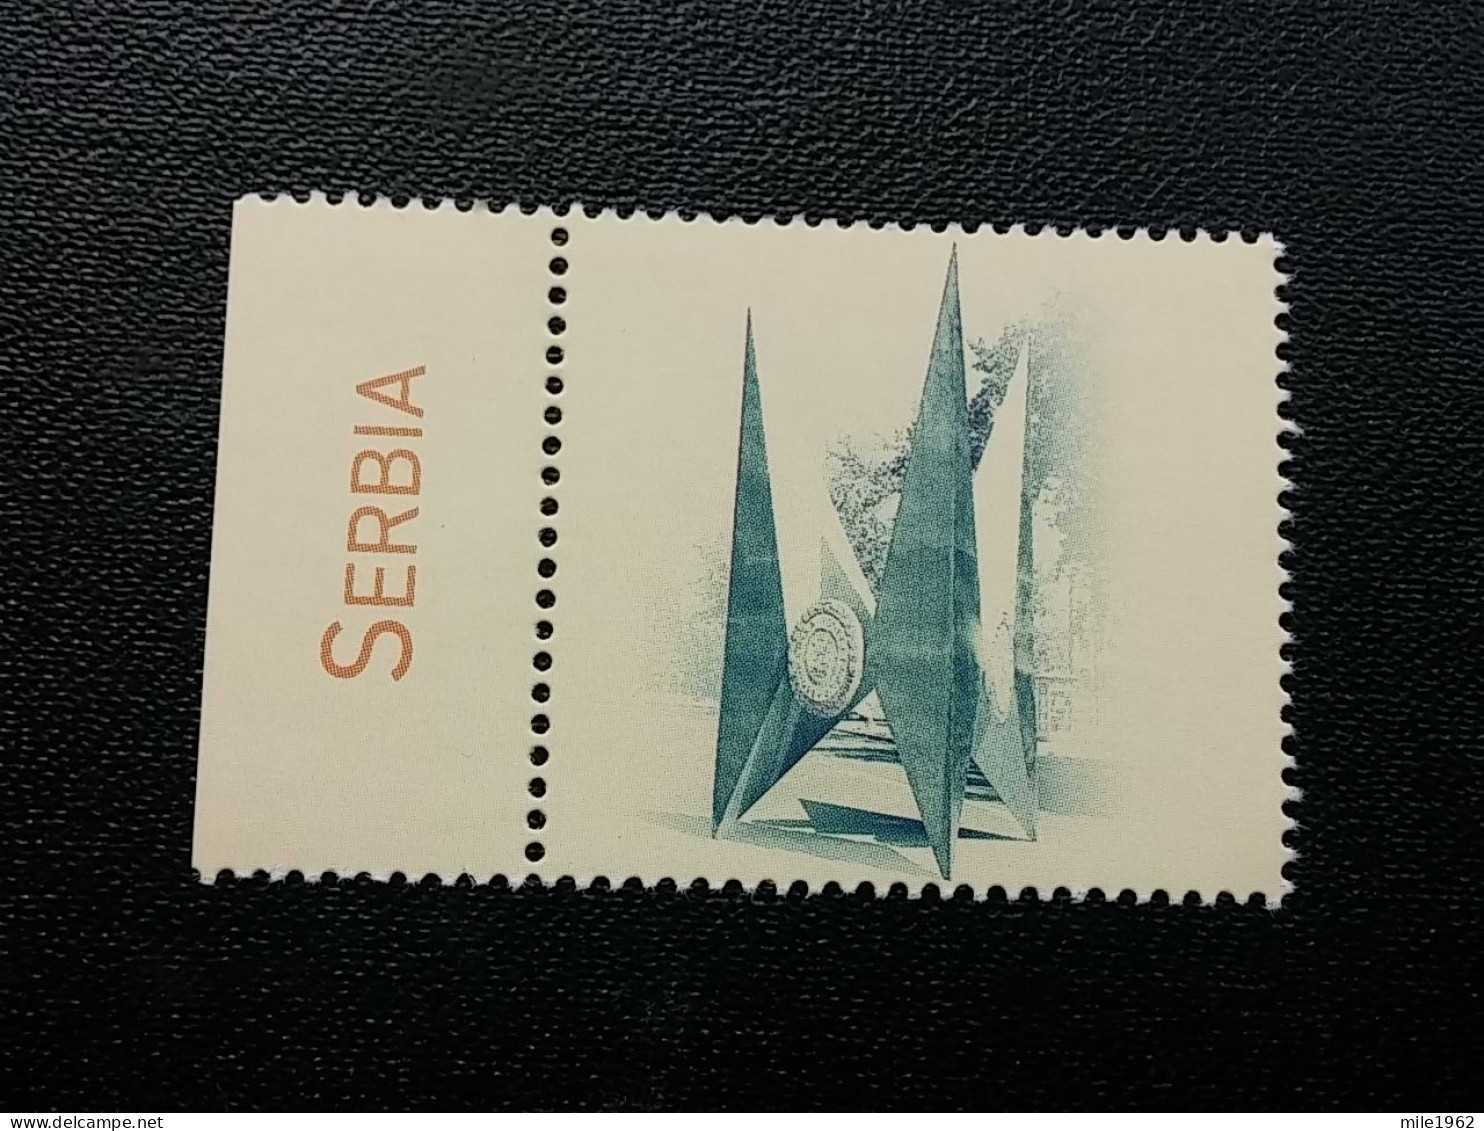 Stamp 3-14 - Serbia 2021 - VIGNETTE- The 60th Anniversary Of The First Conference Of The Non-Aligned Movement - Serbie